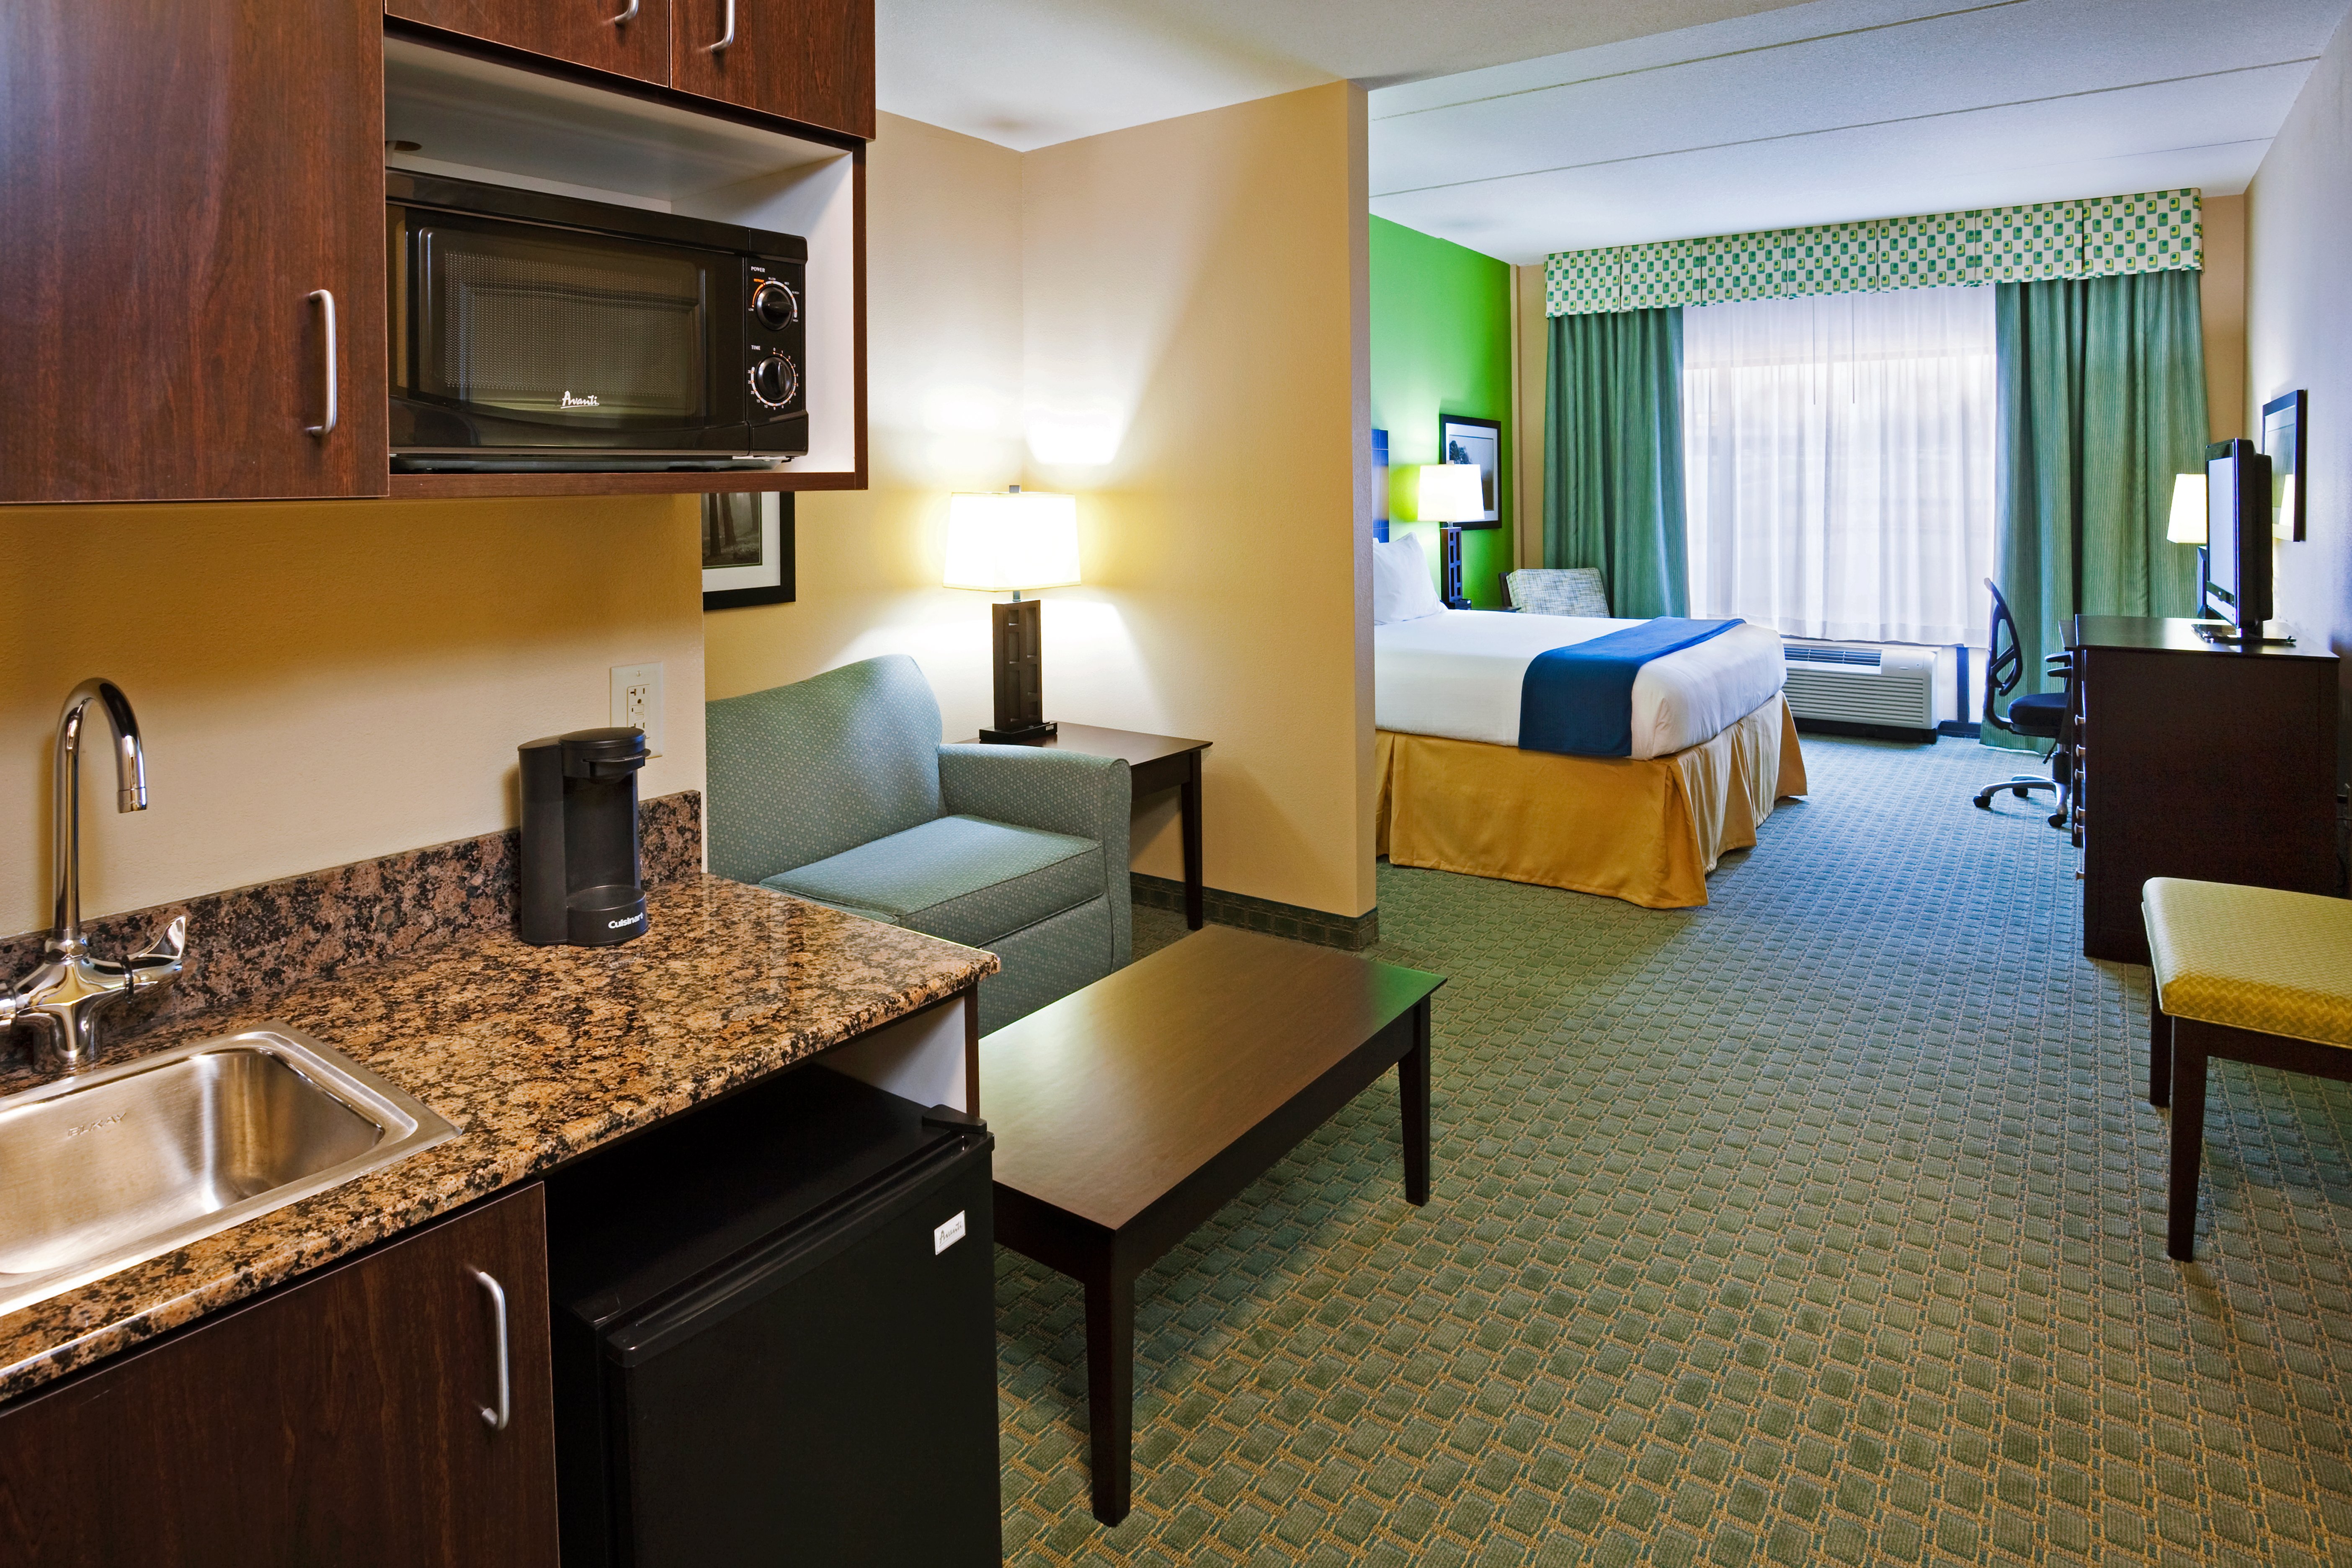 Relax & unwind in our roomy king suite!